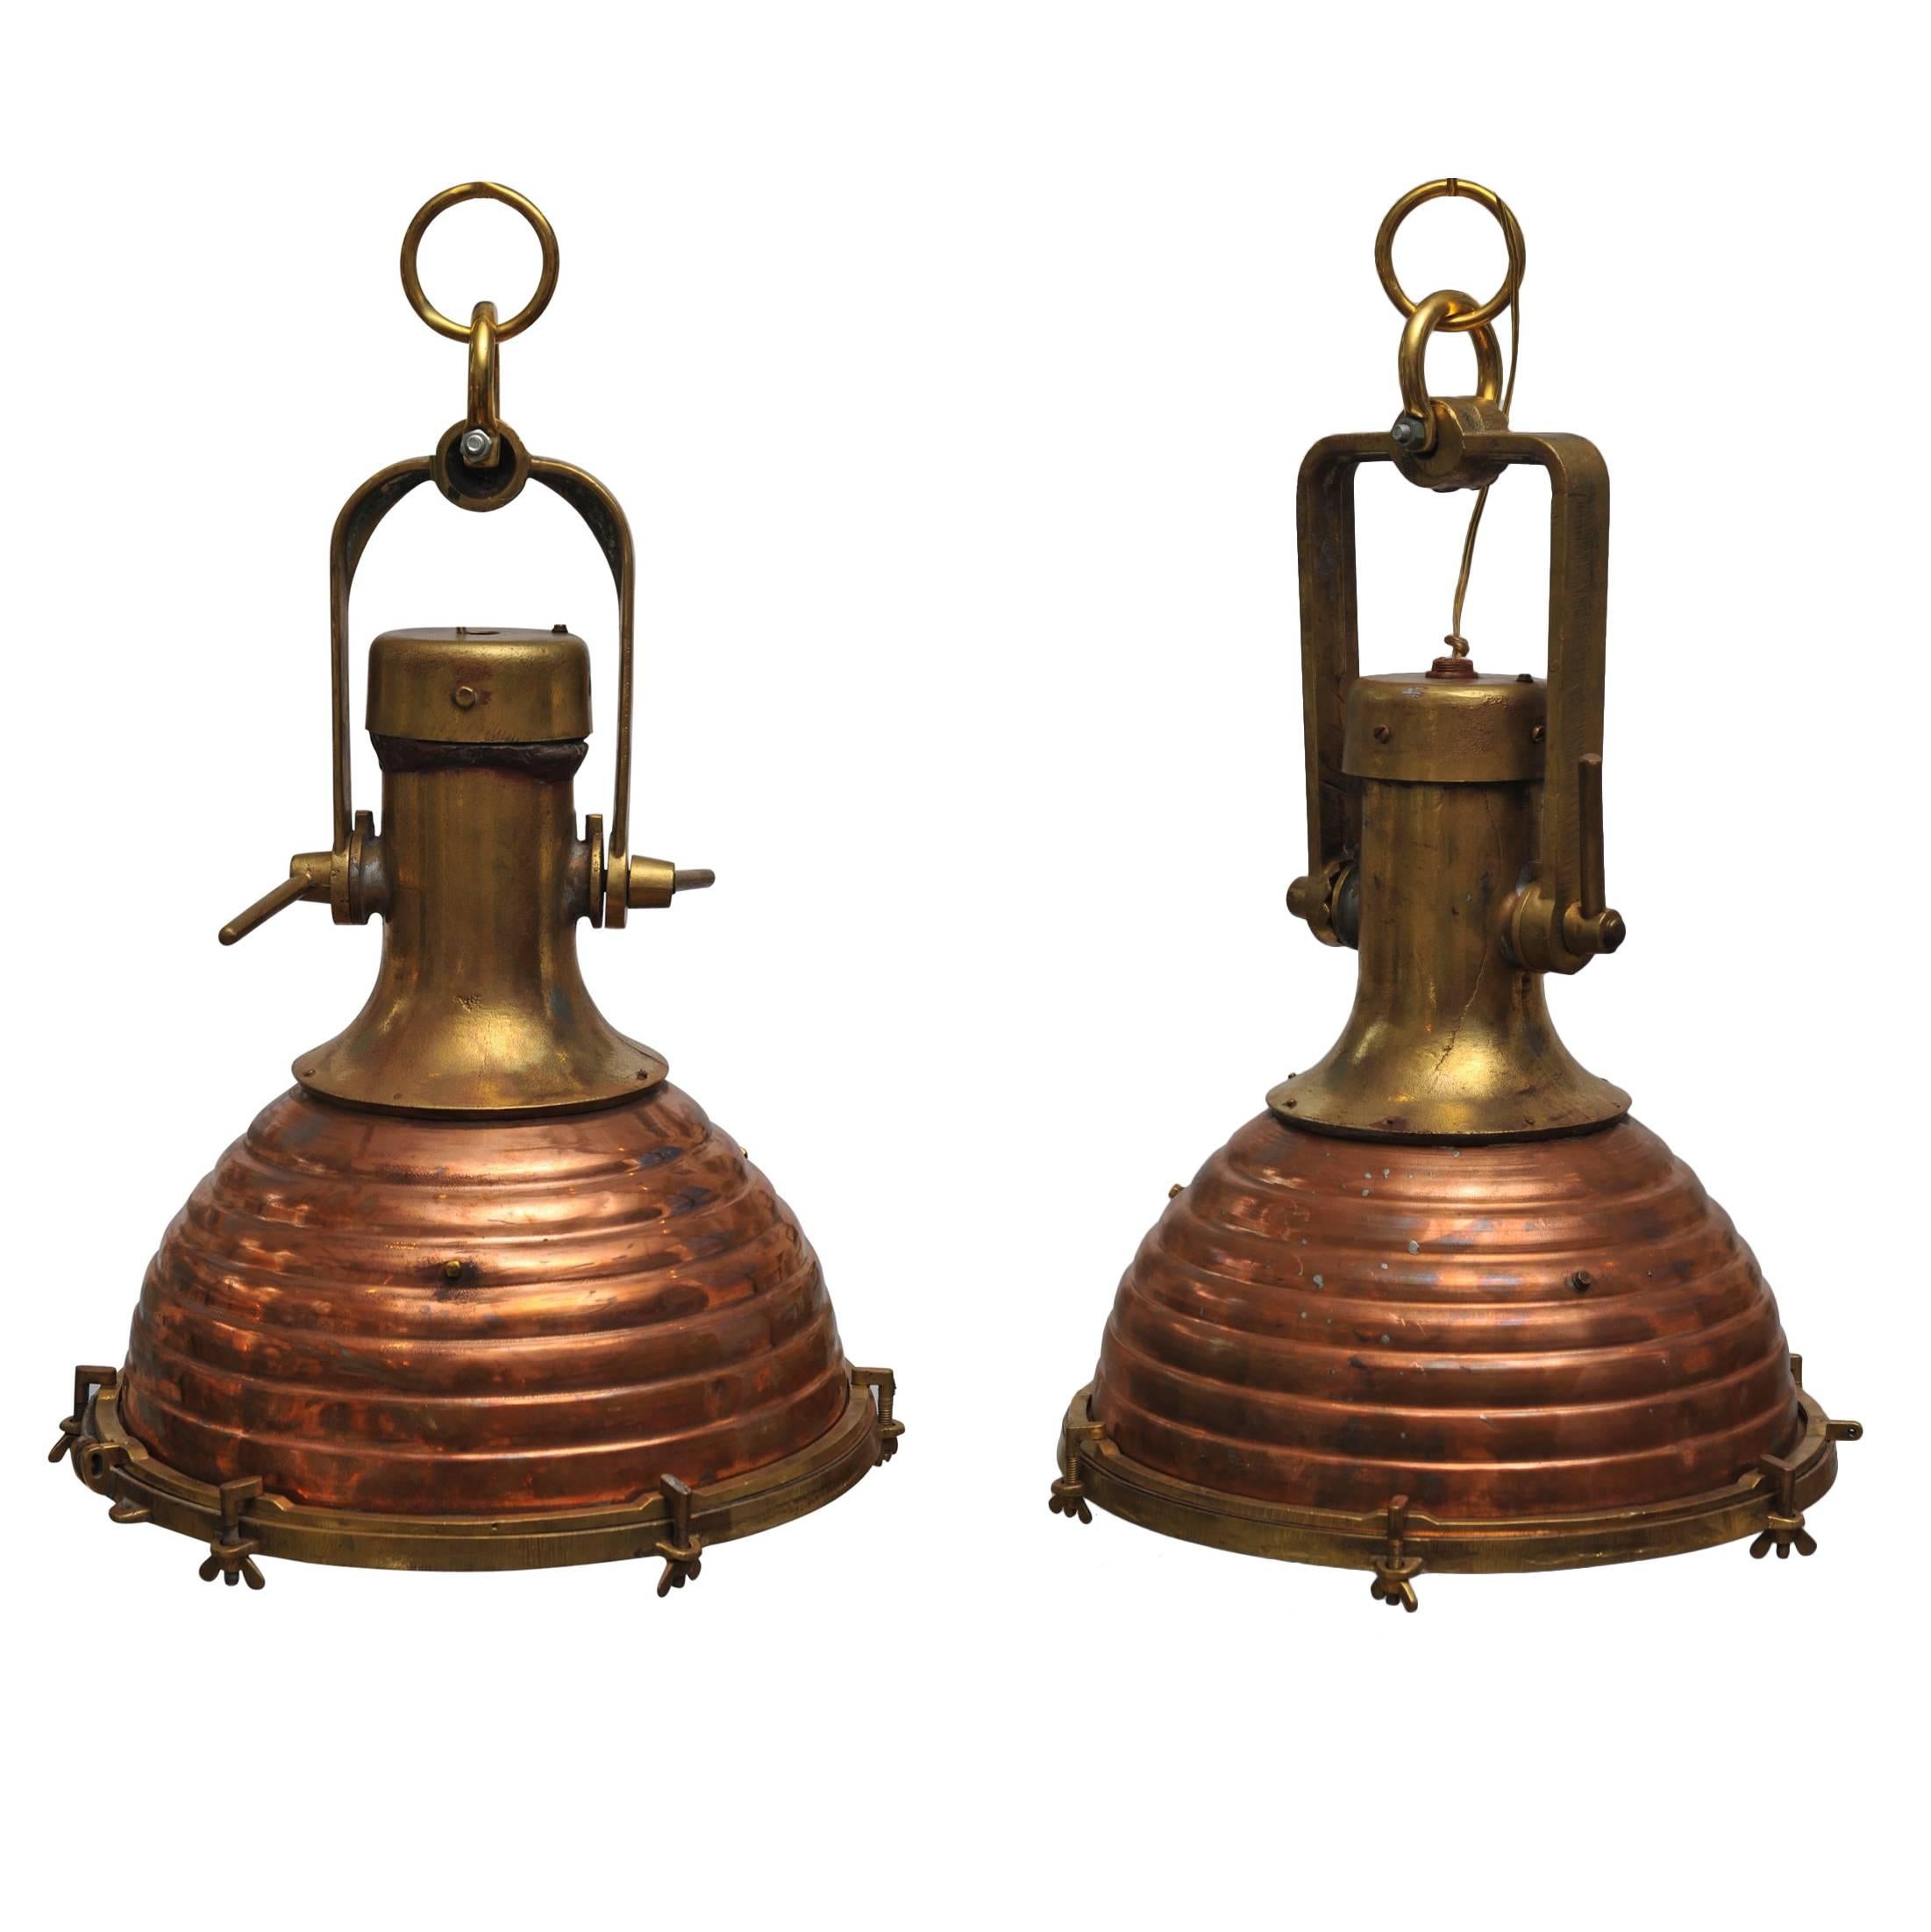 Pair of Rare Large Nautical Copper and Brass Ship's Deck Lights, Mid-Century